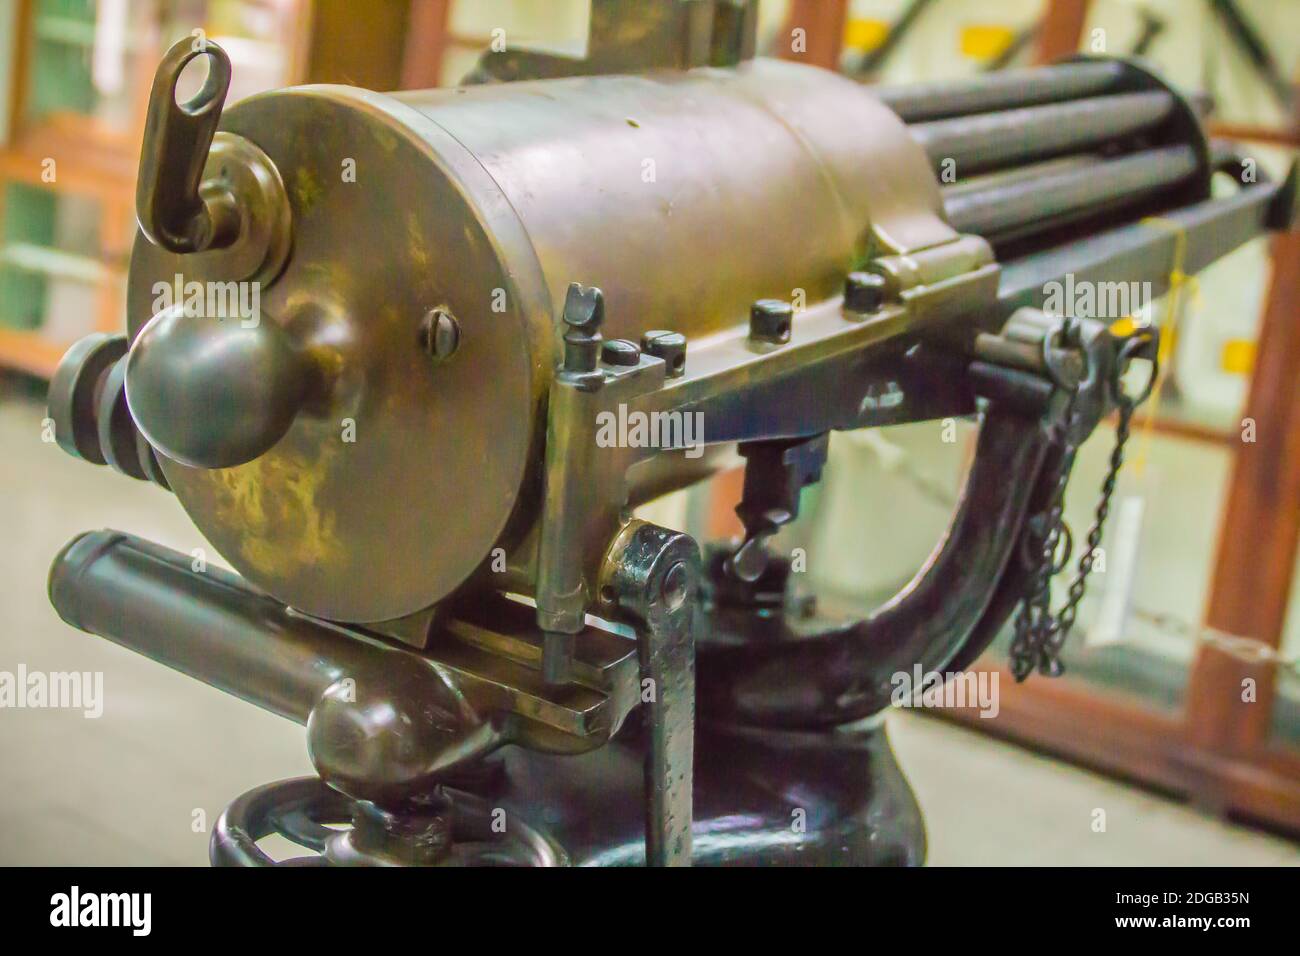 Old Gatling gun, one of the best-known early rapid-fire spring loaded. The Gatling gun was first used in warfare during the American Civil War. Stock Photo